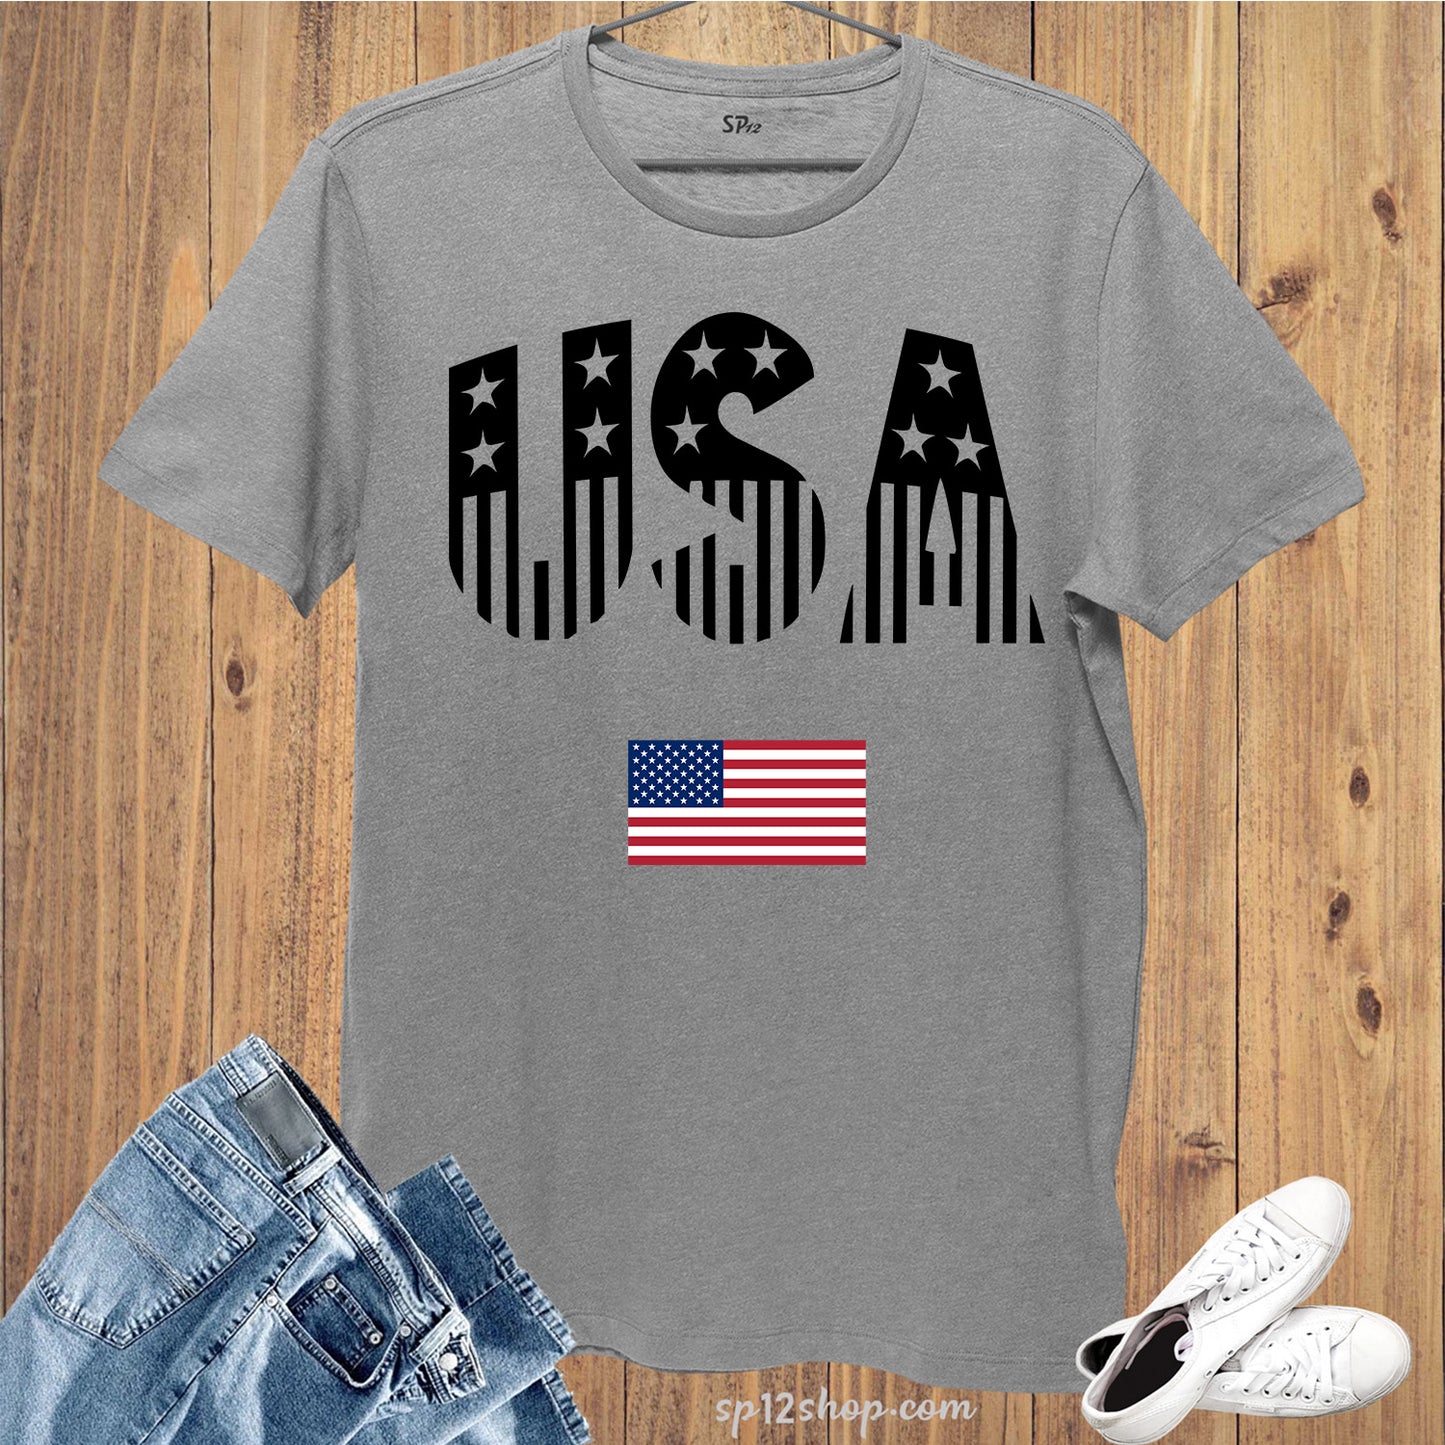 USA Flag Lips 4th of July Patriotic Day and Independence Day T Shirt